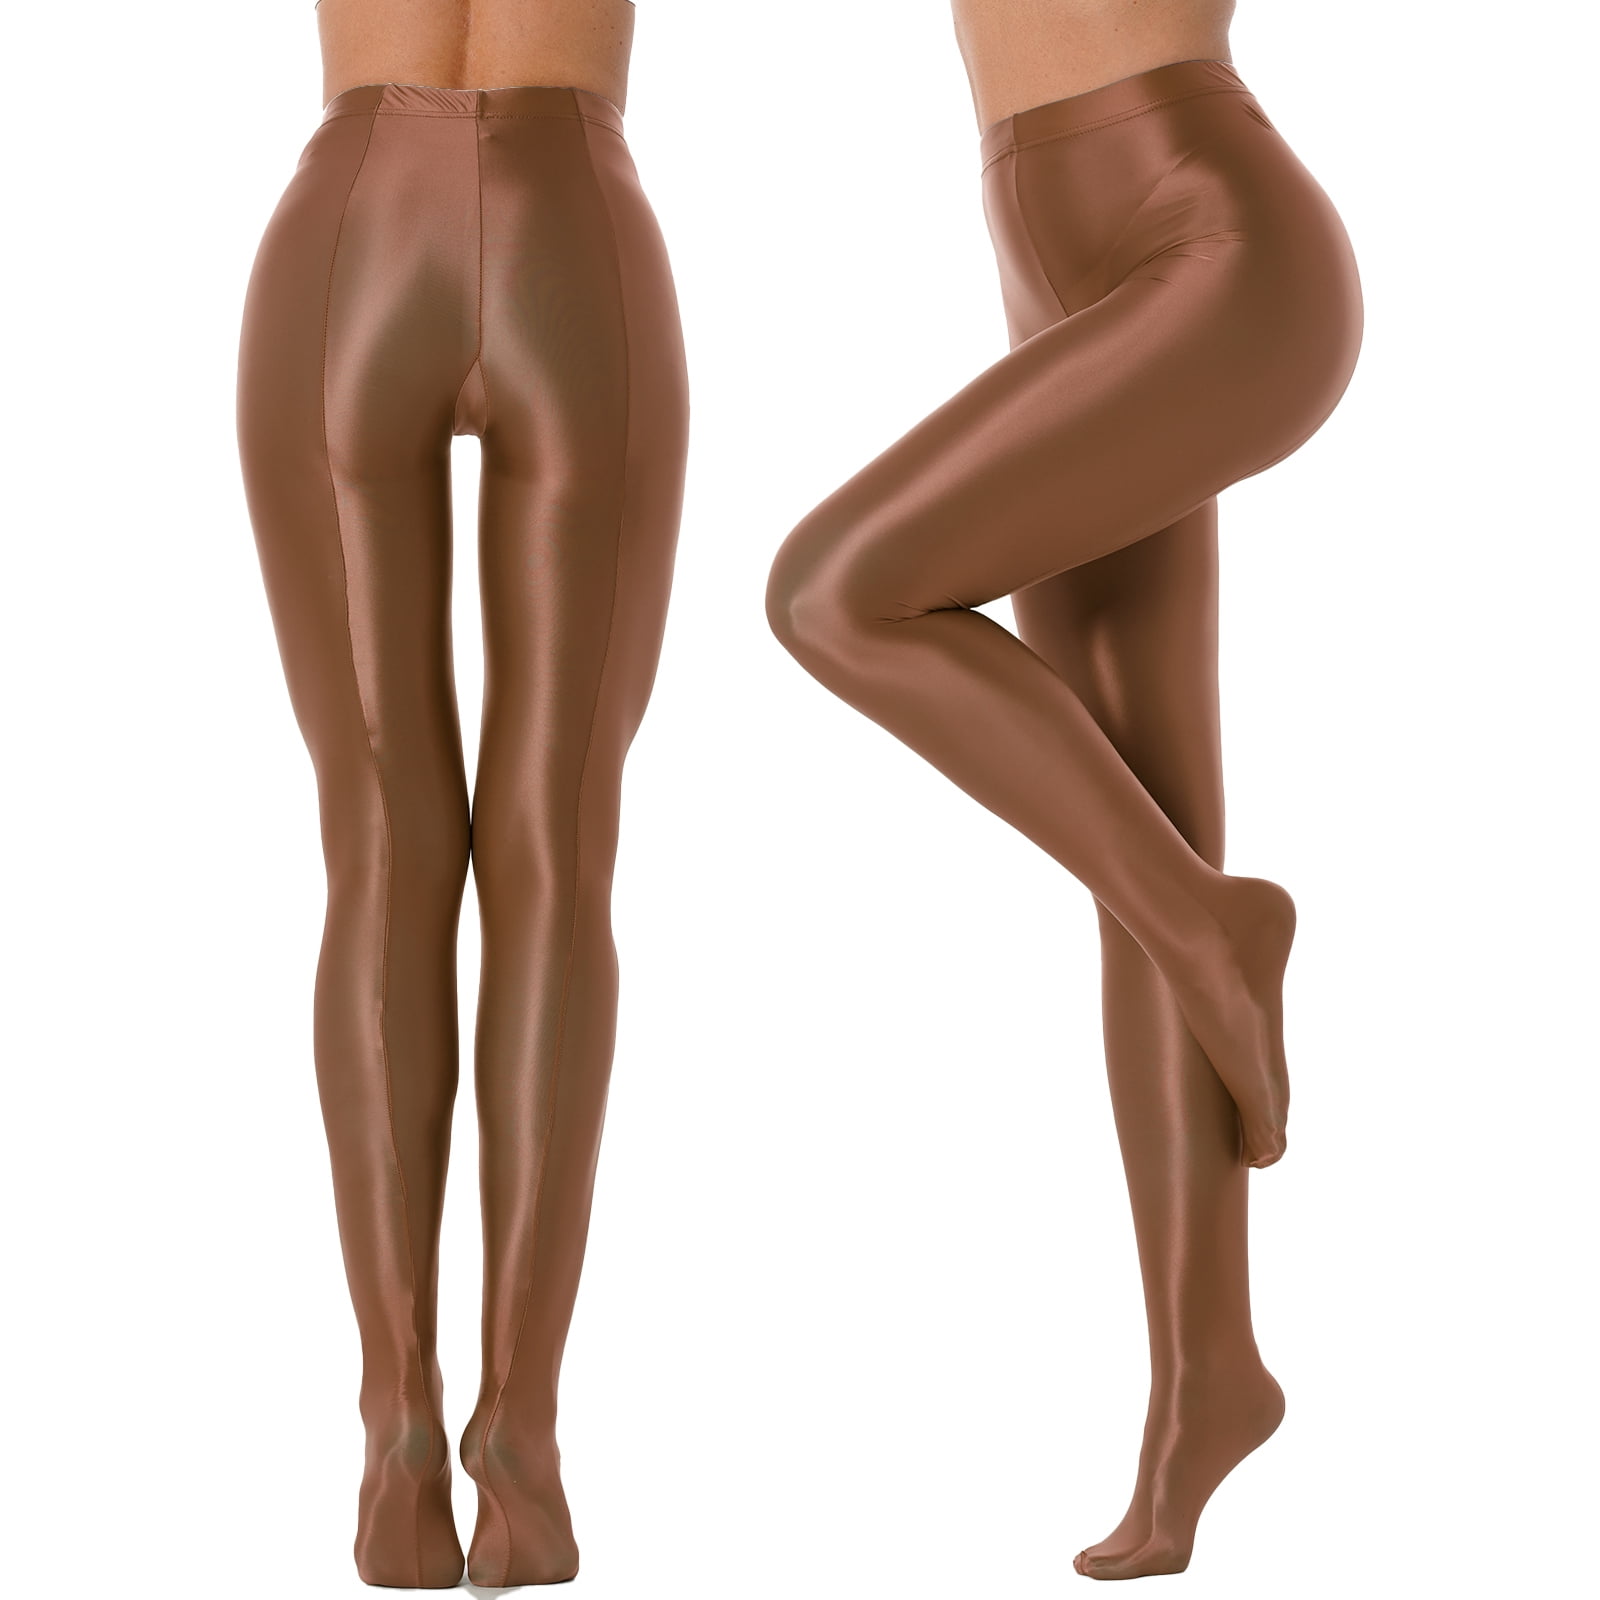 inhzoy Woman Shiny Oil Glossy Footed Pantyhose Tights Leggings